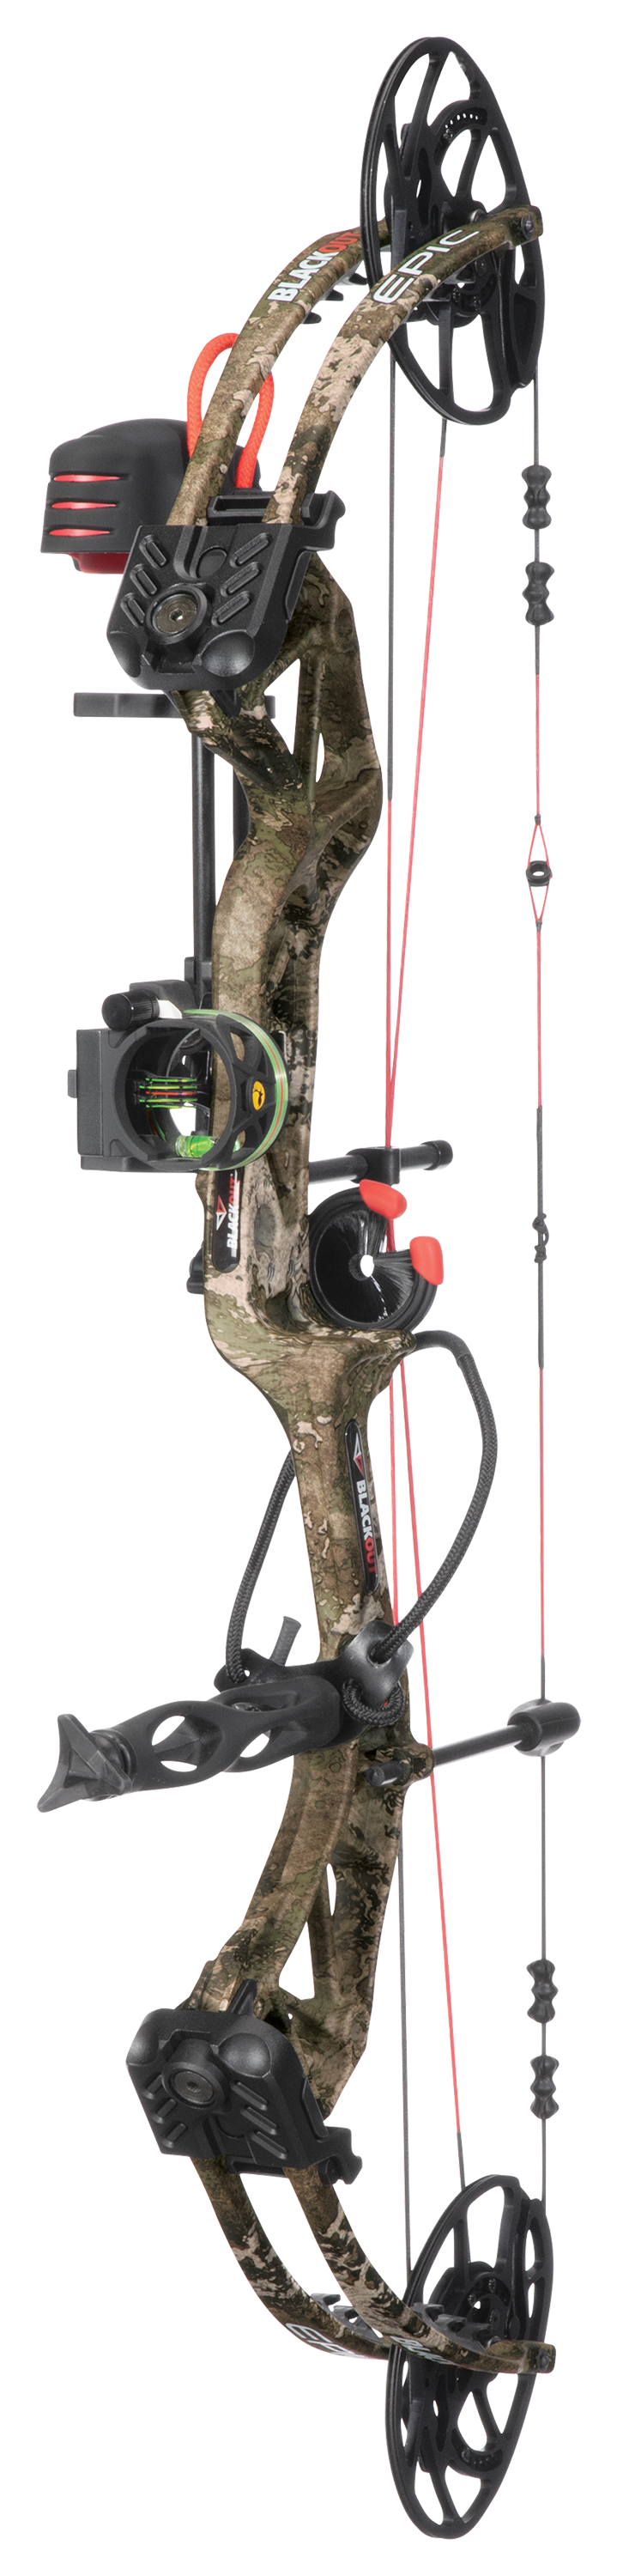 BlackOut Epic Compound Bow Package - 45-60 lbs. - Left Hand - TrueTimber Strata